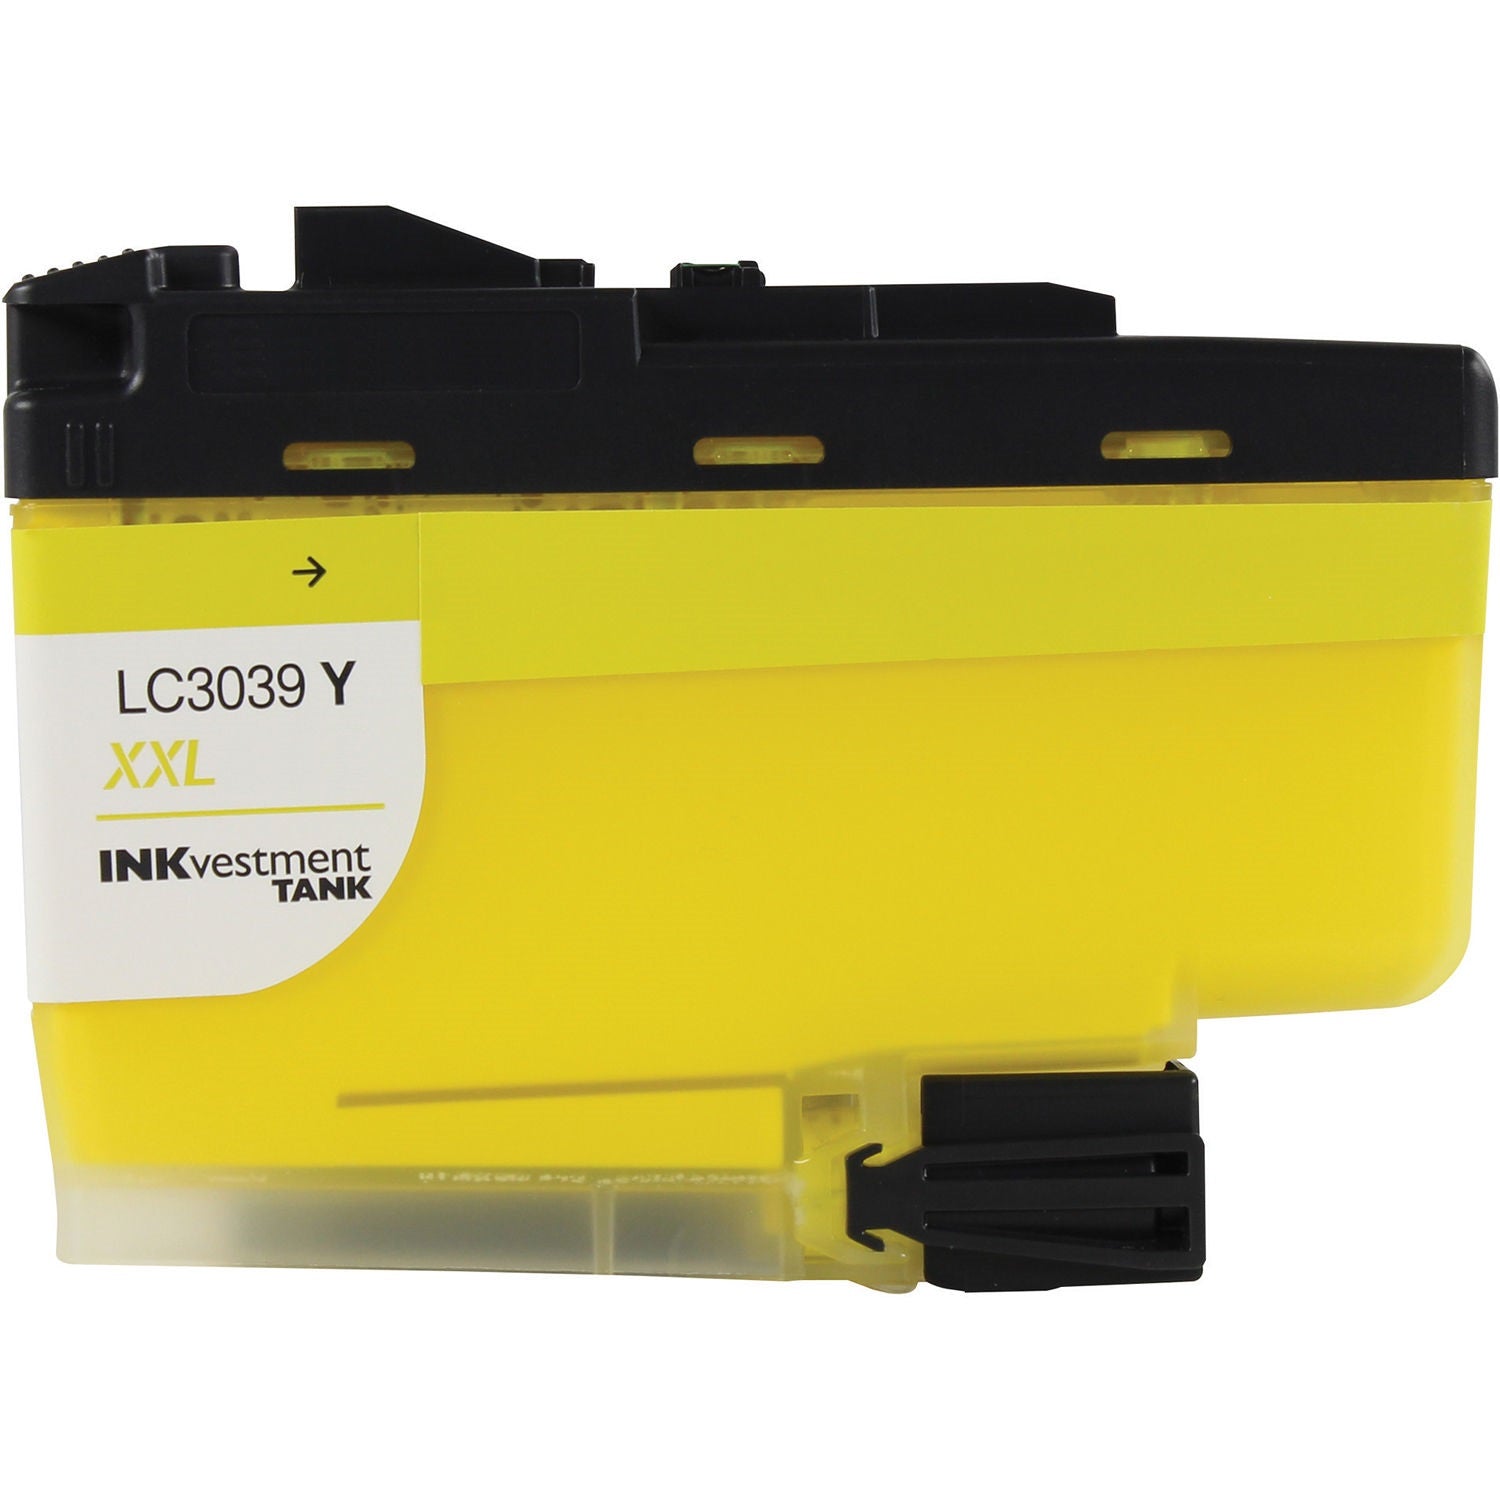 Absolute Toner Compatible Brother LC3039Y High Yield Yellow Ink Cartridge, LC3039 Brother Ink Cartridges